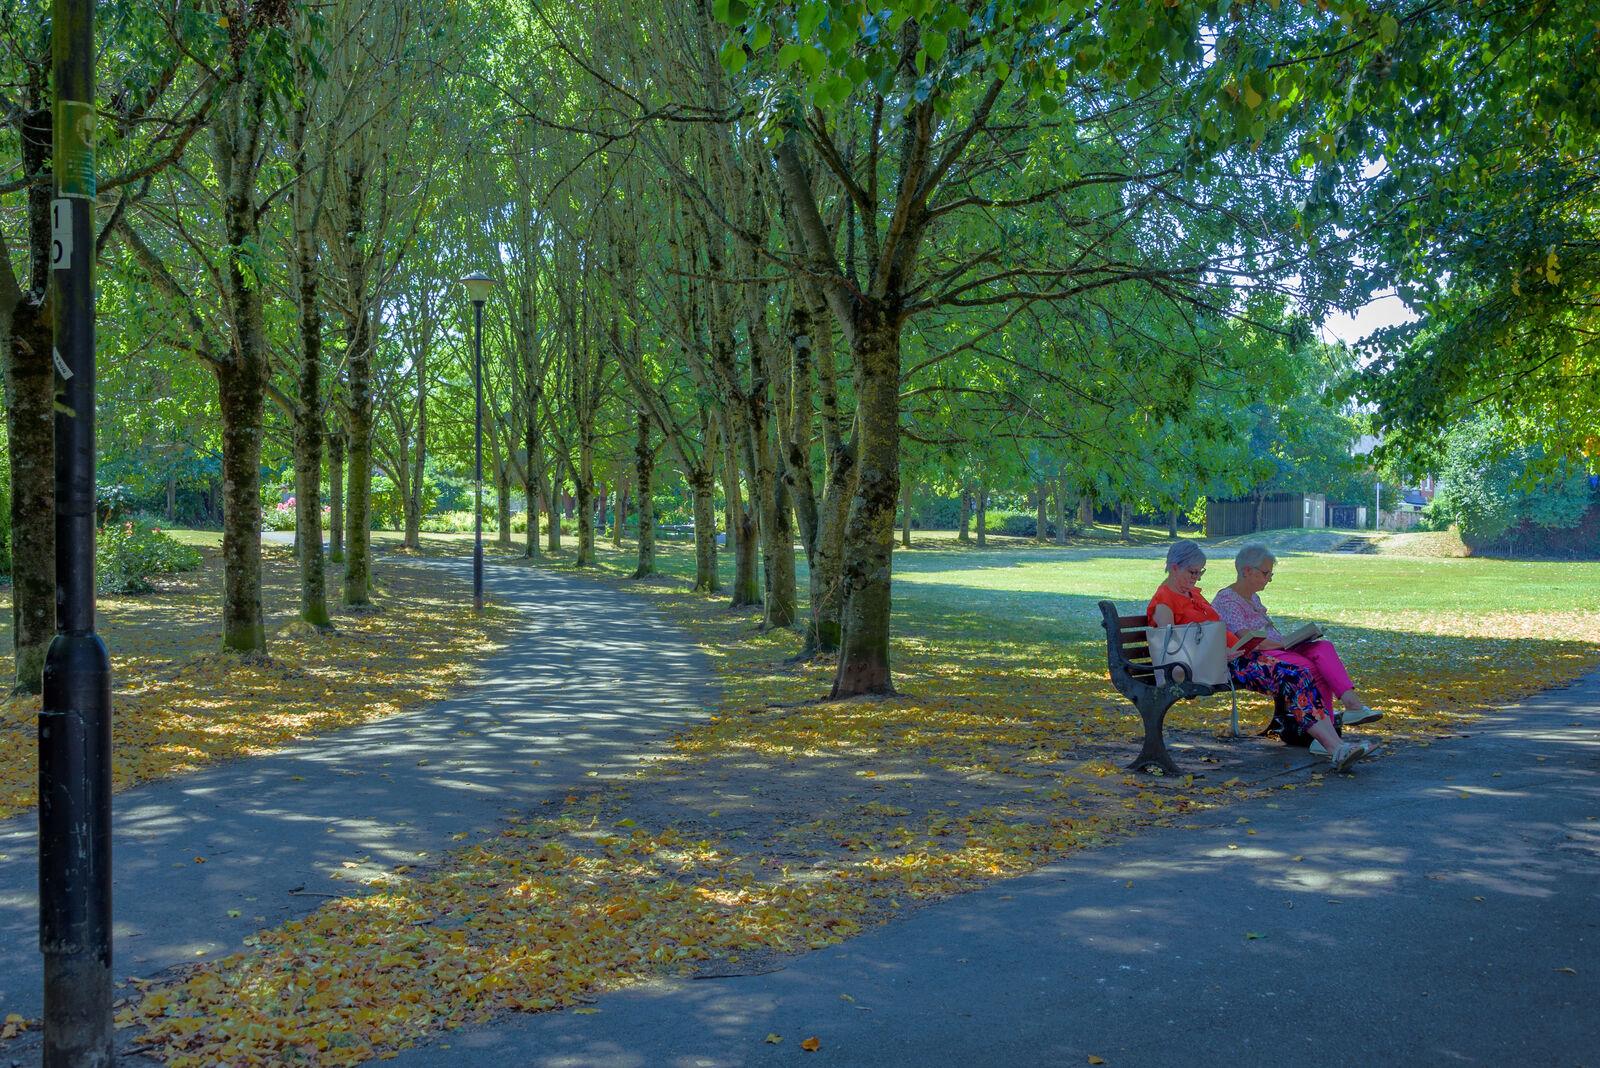 Two people sat on a bench next to a path under trees in Millennium Park, Nailsea